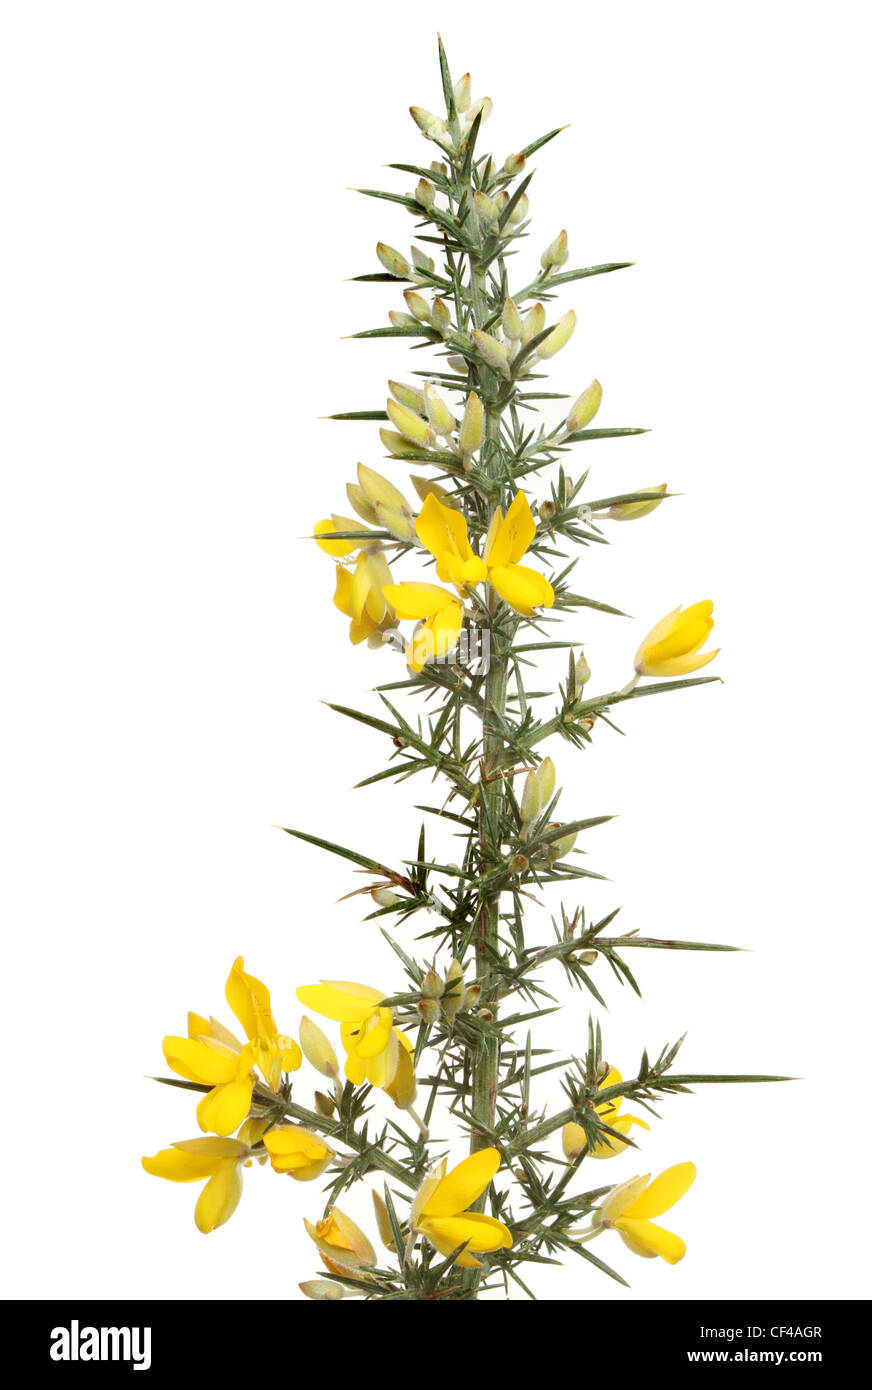 Flowering gorse with yellow flowers and thorny foliage isolated against white Stock Photo